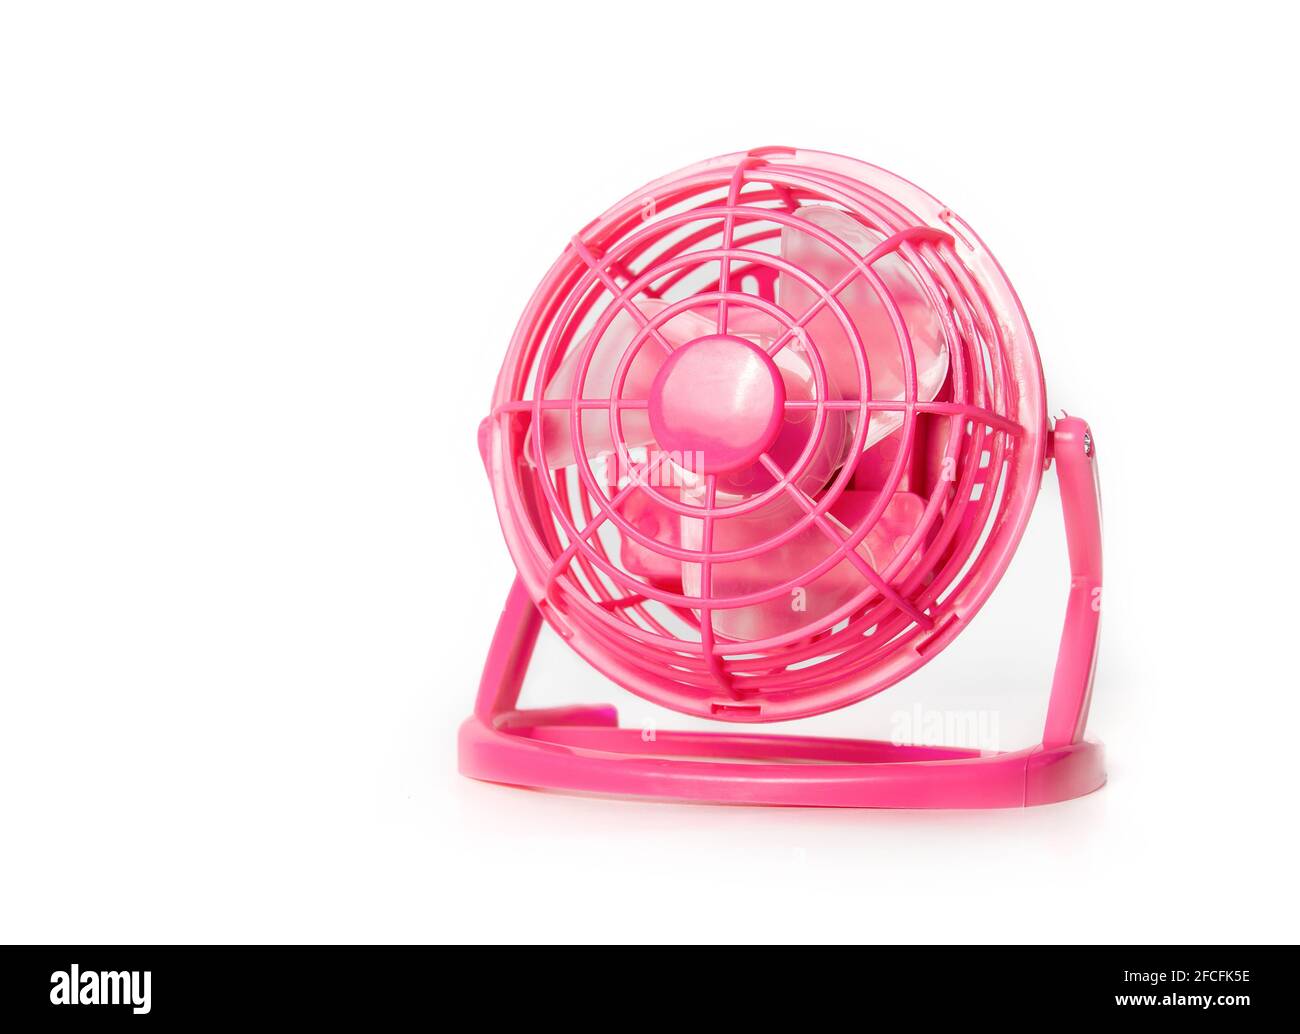 Mini fan. Portable battery operated hot pink small table ventilator to cool down and circulate air during hot summer days. Use at the office, car trip Stock Photo